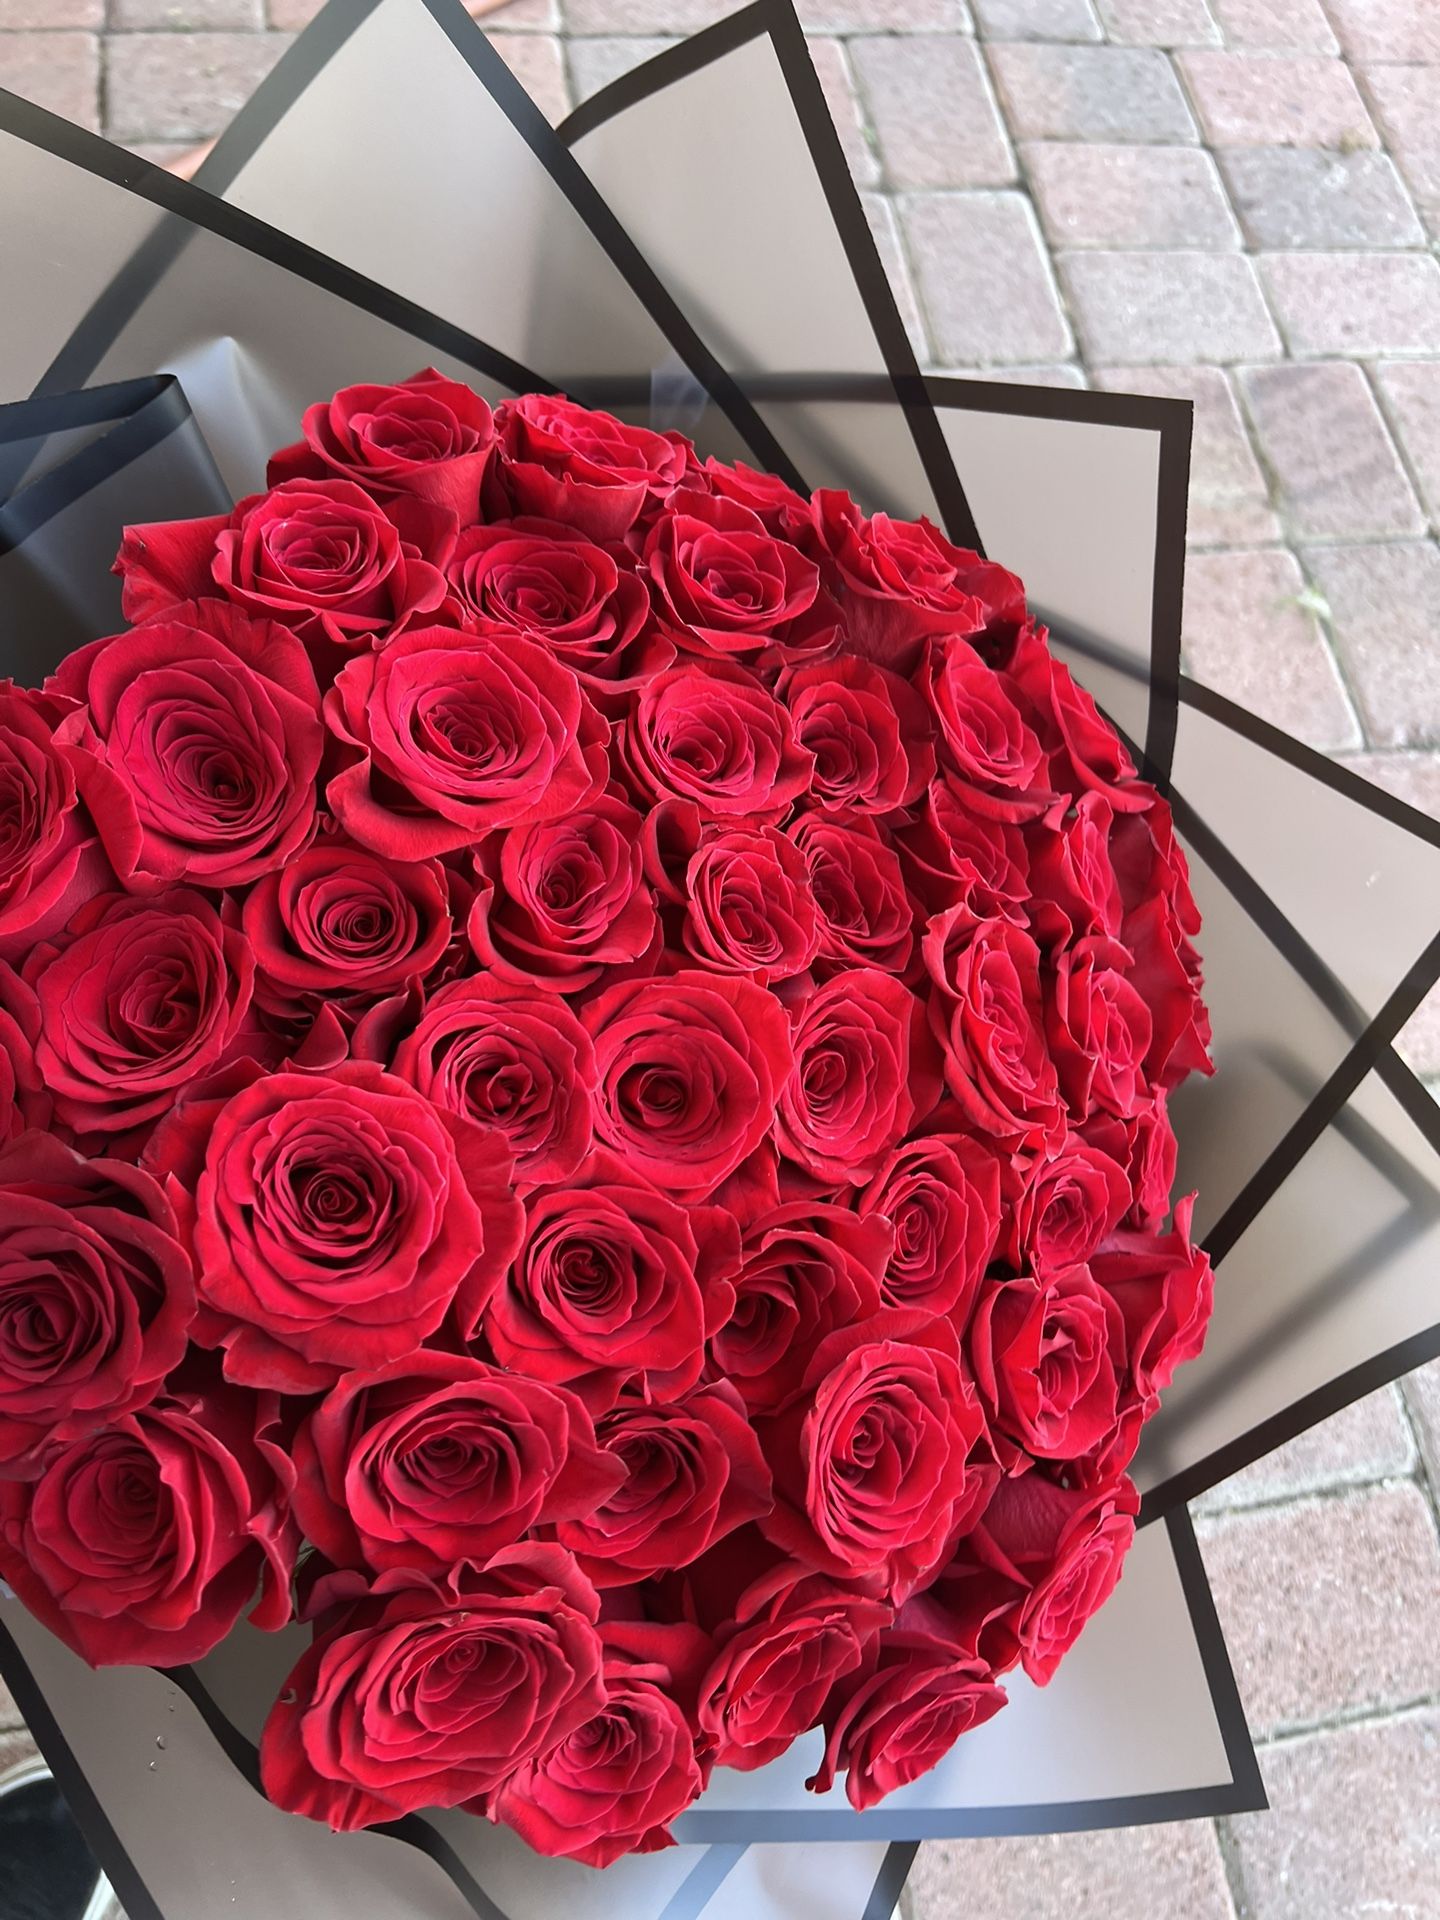 50 Red Rose Bouquet